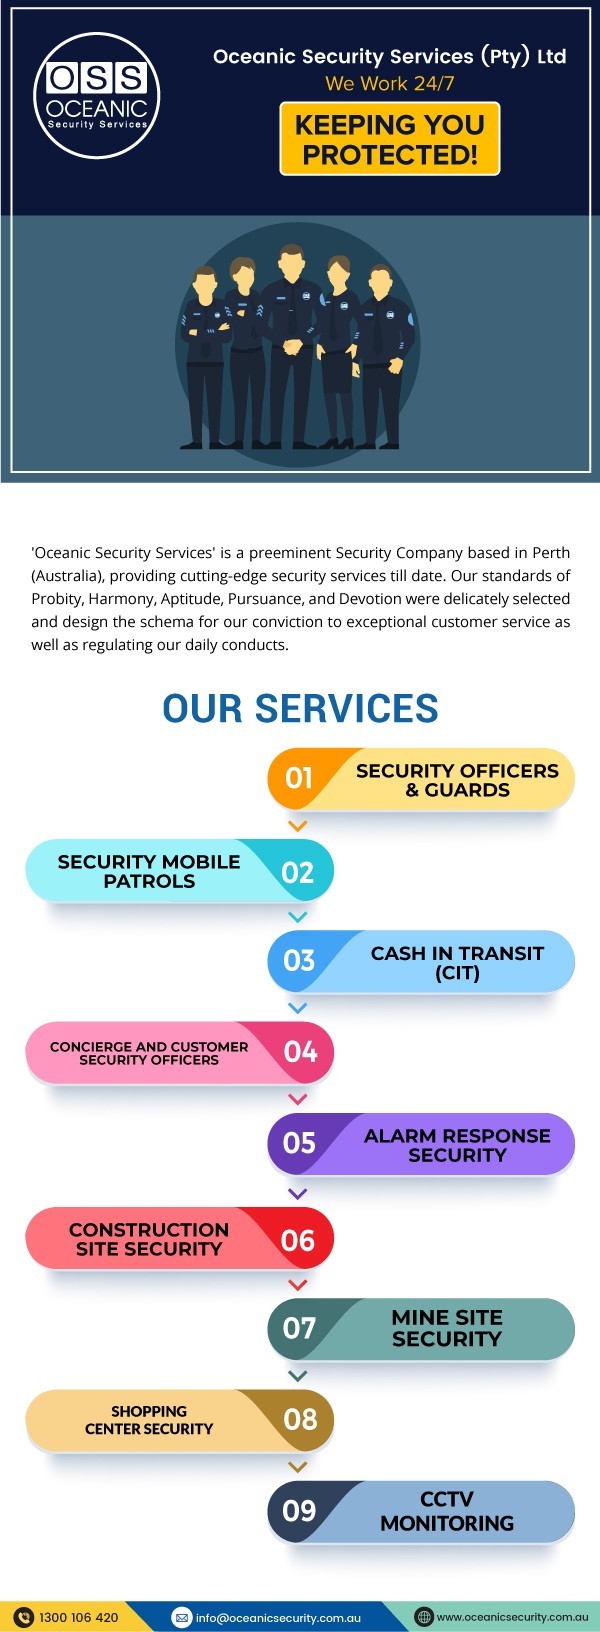 Security Companies Perth - Security Guard and Mobile Patrol - Oceanic Security Services Pty Ltd